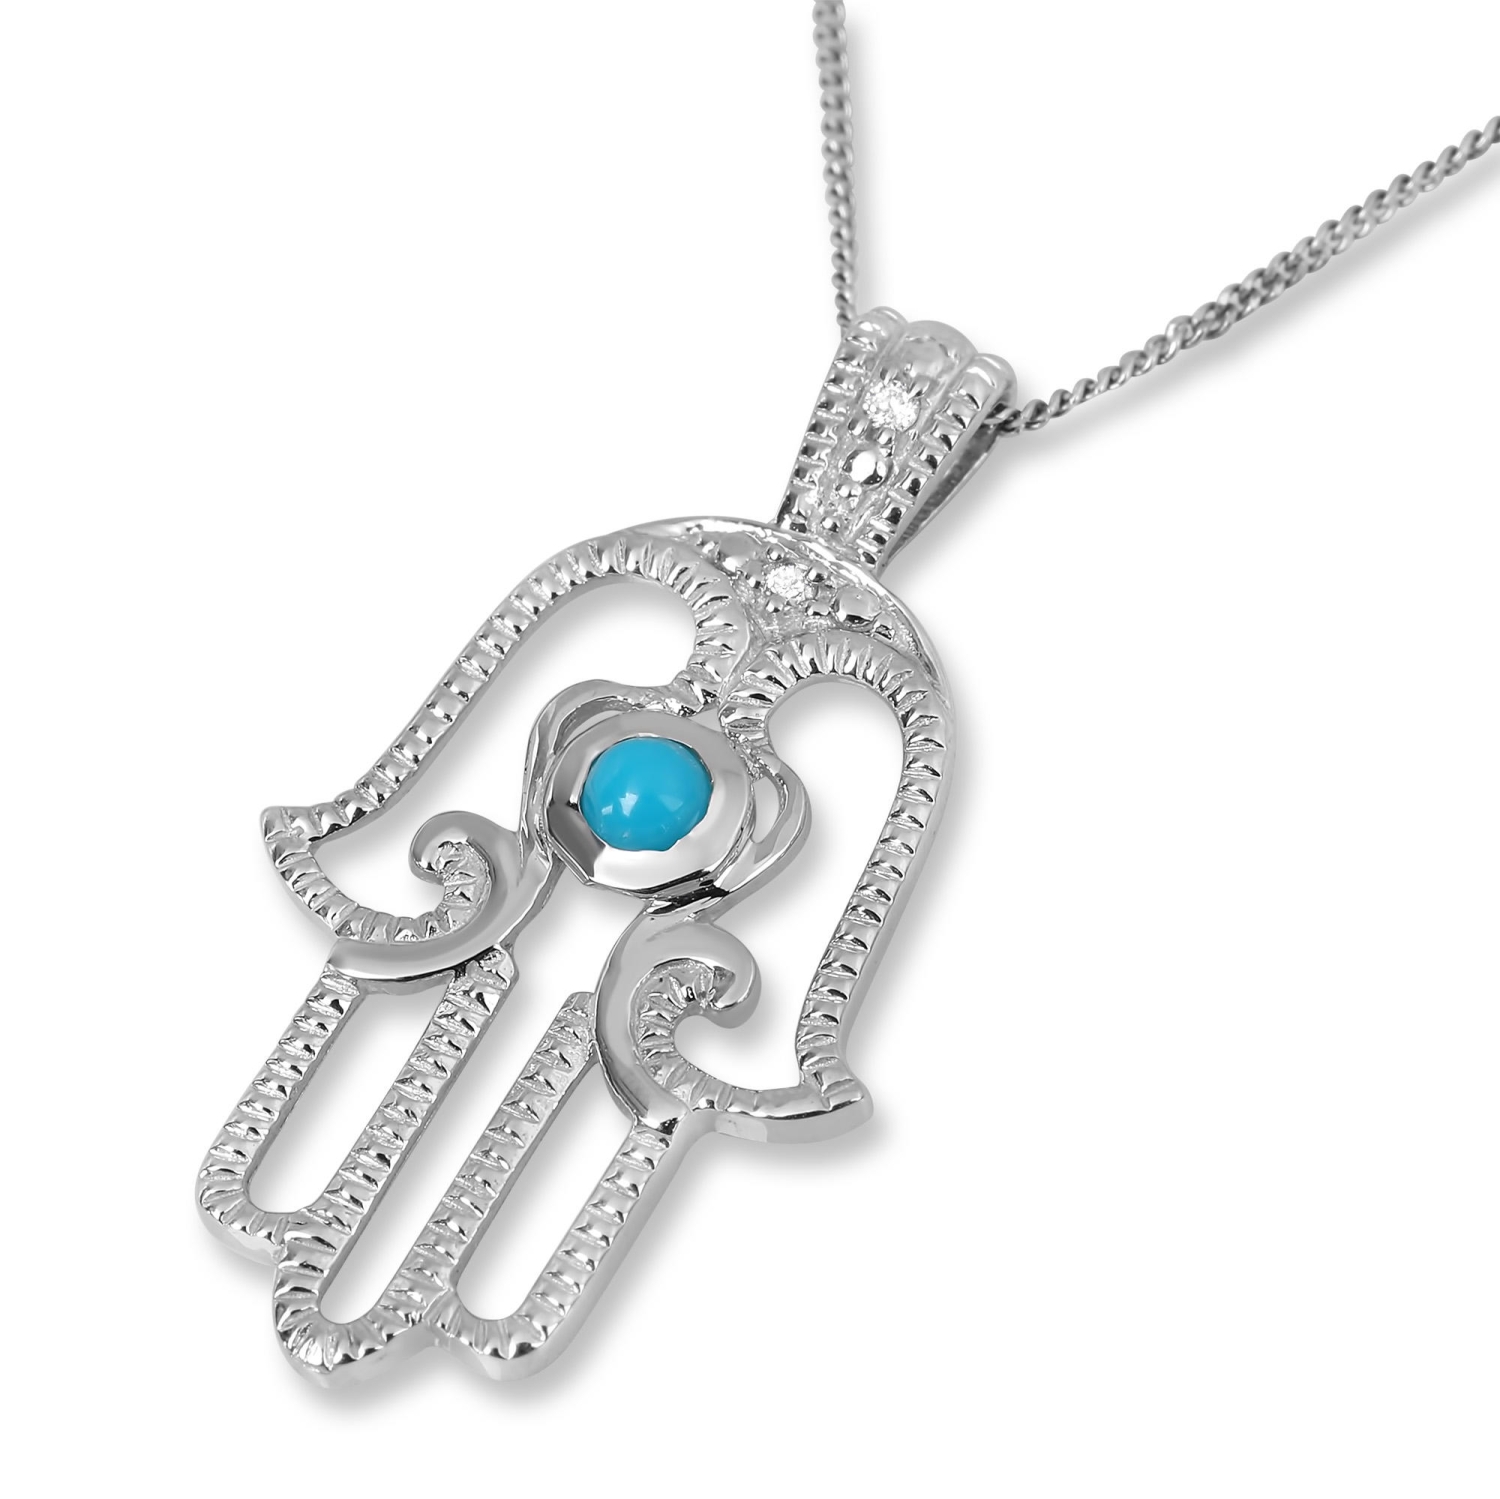 14K Gold Curved Hamsa Pendant with Diamonds and Turquoise Stone - 1